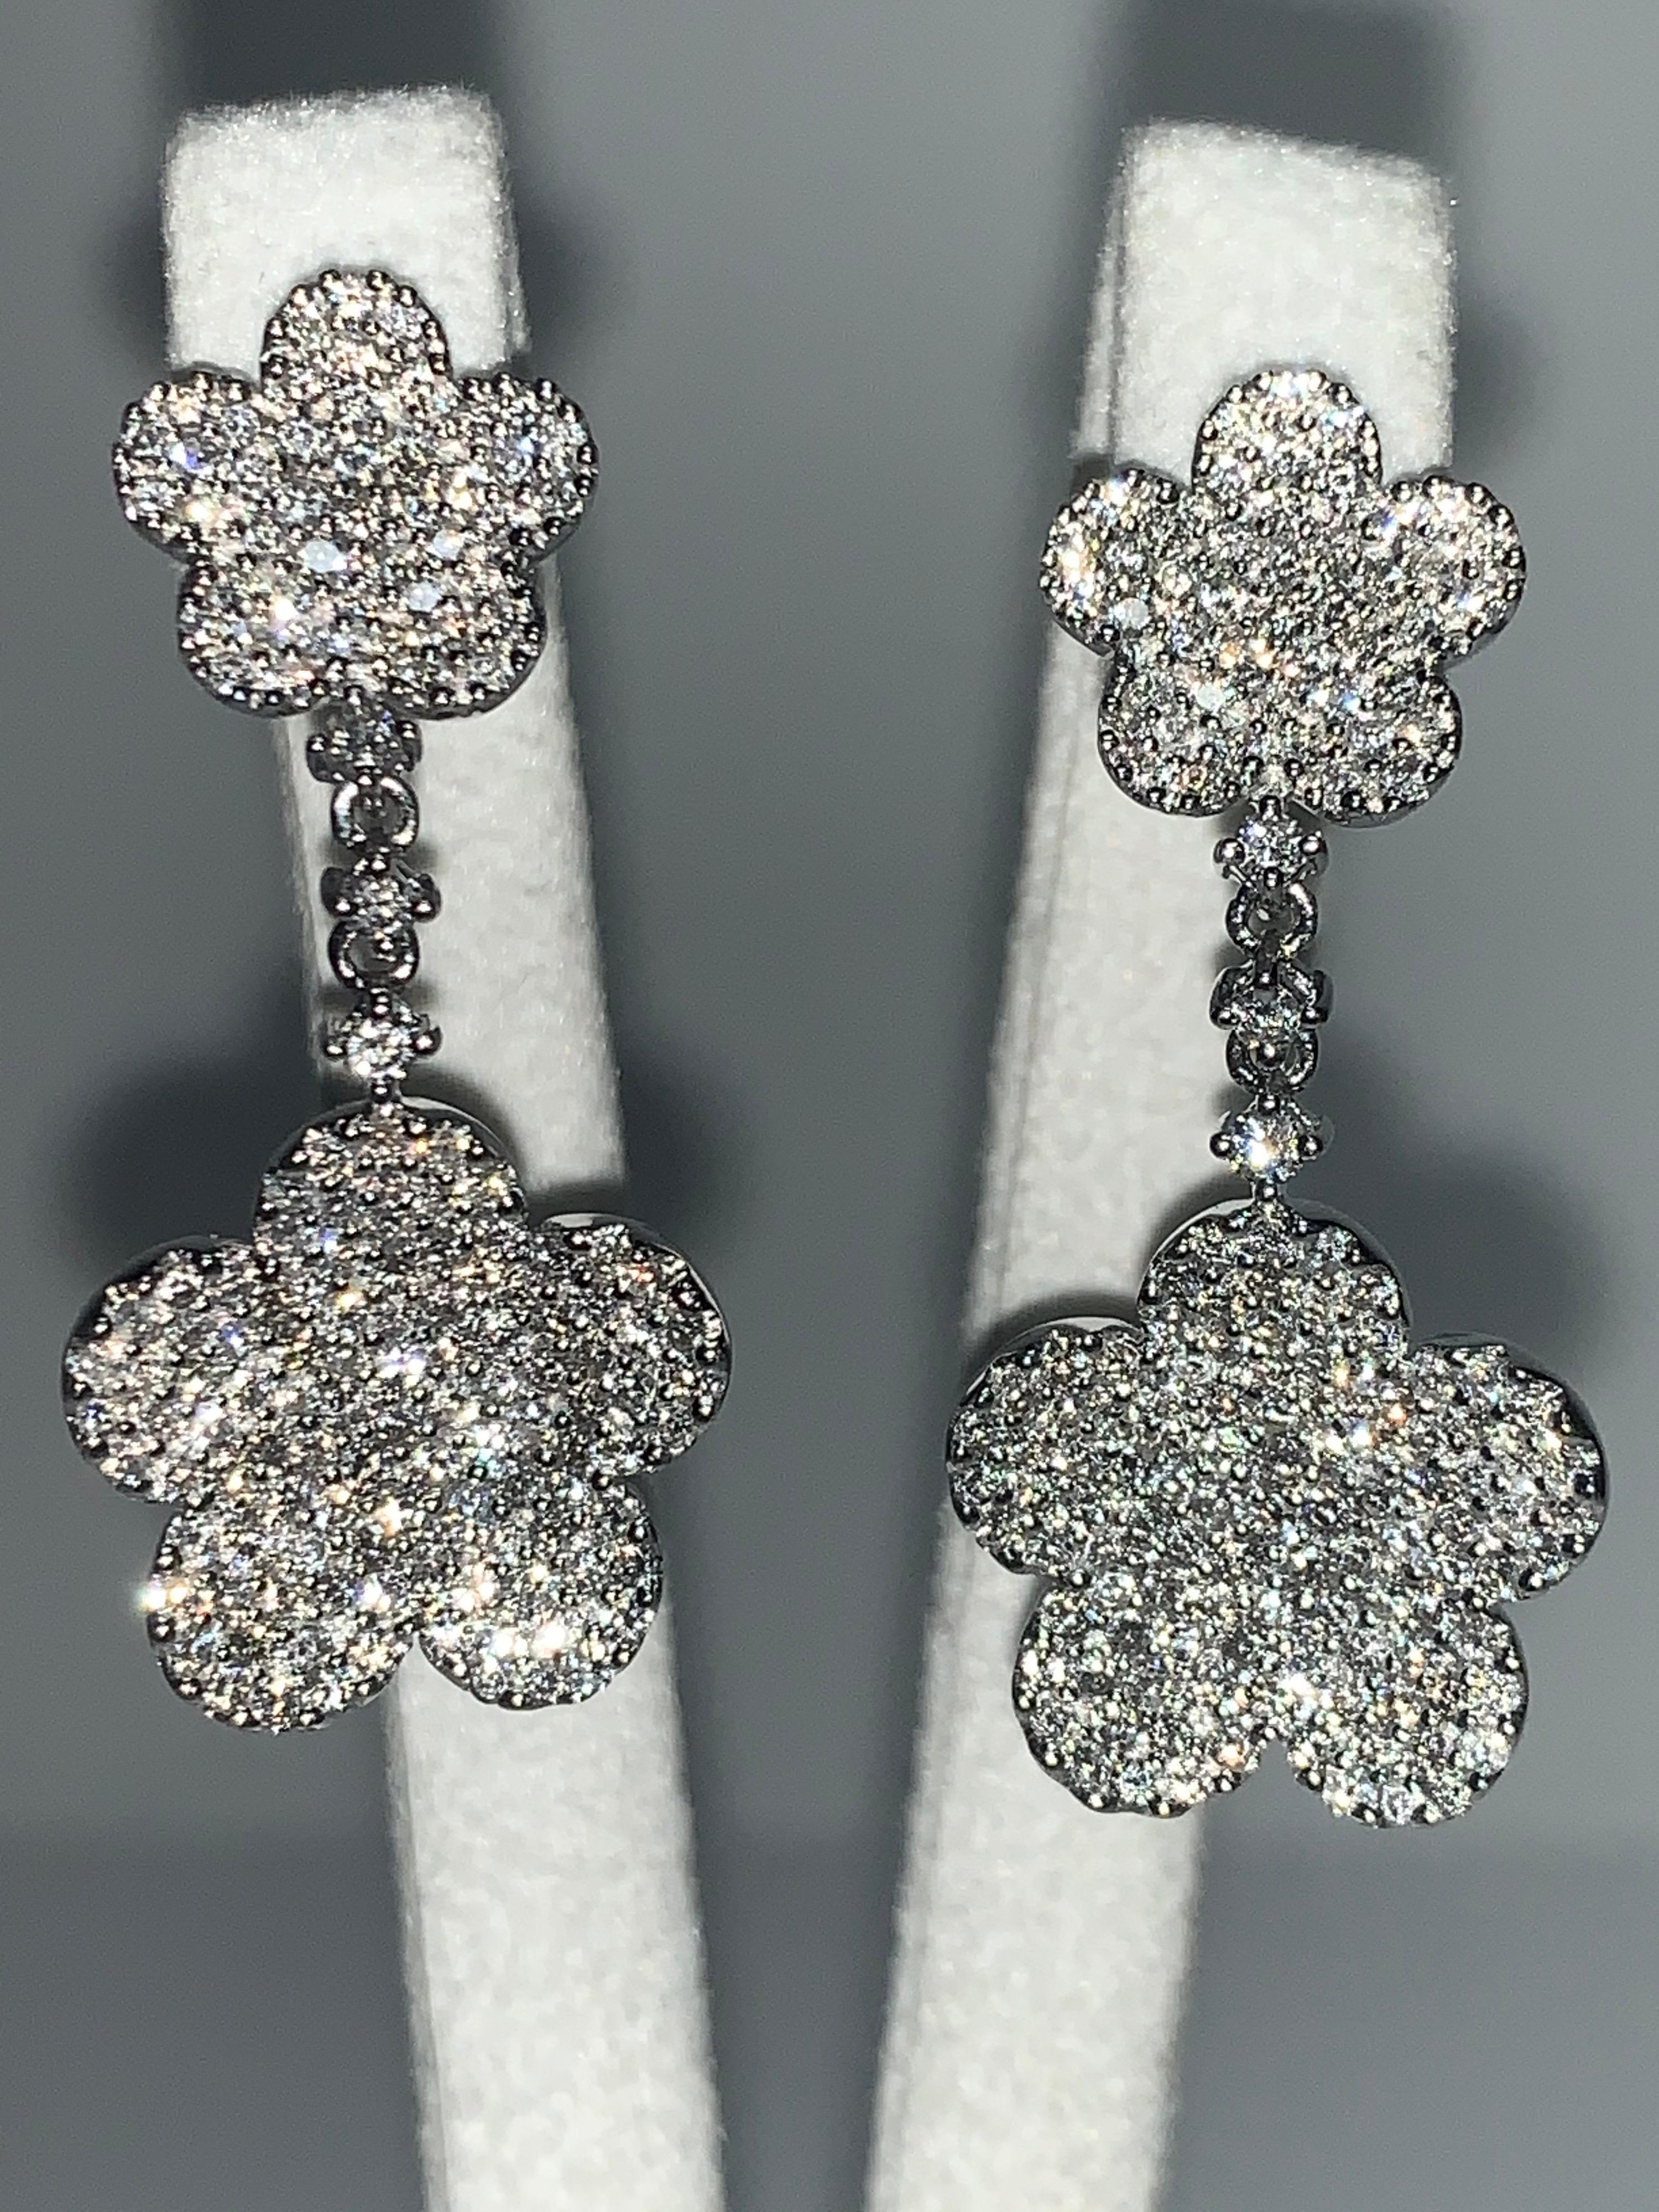 Stunning Handcrafted one-of-a-kind 18K White Gold Diamond Double Flower Earrings. Edgy attention-getting earrings that you will love wearing to your favorite events.
18K White Gold
Handmade
2.24 Carat White Diamonds

We specialize in unique,